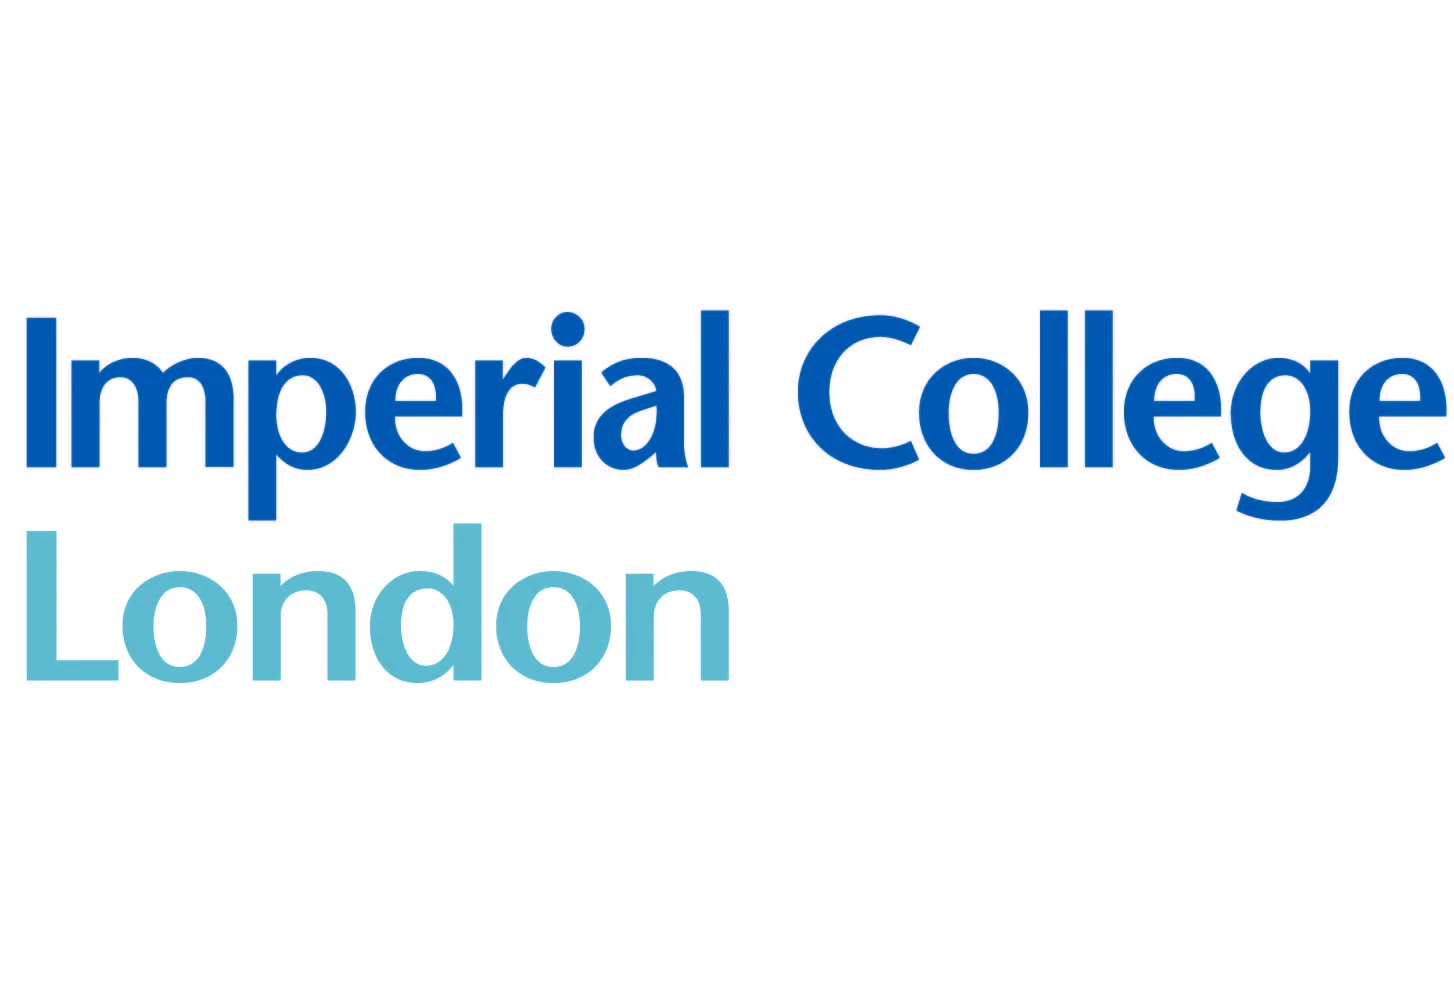 Imperial_College_London